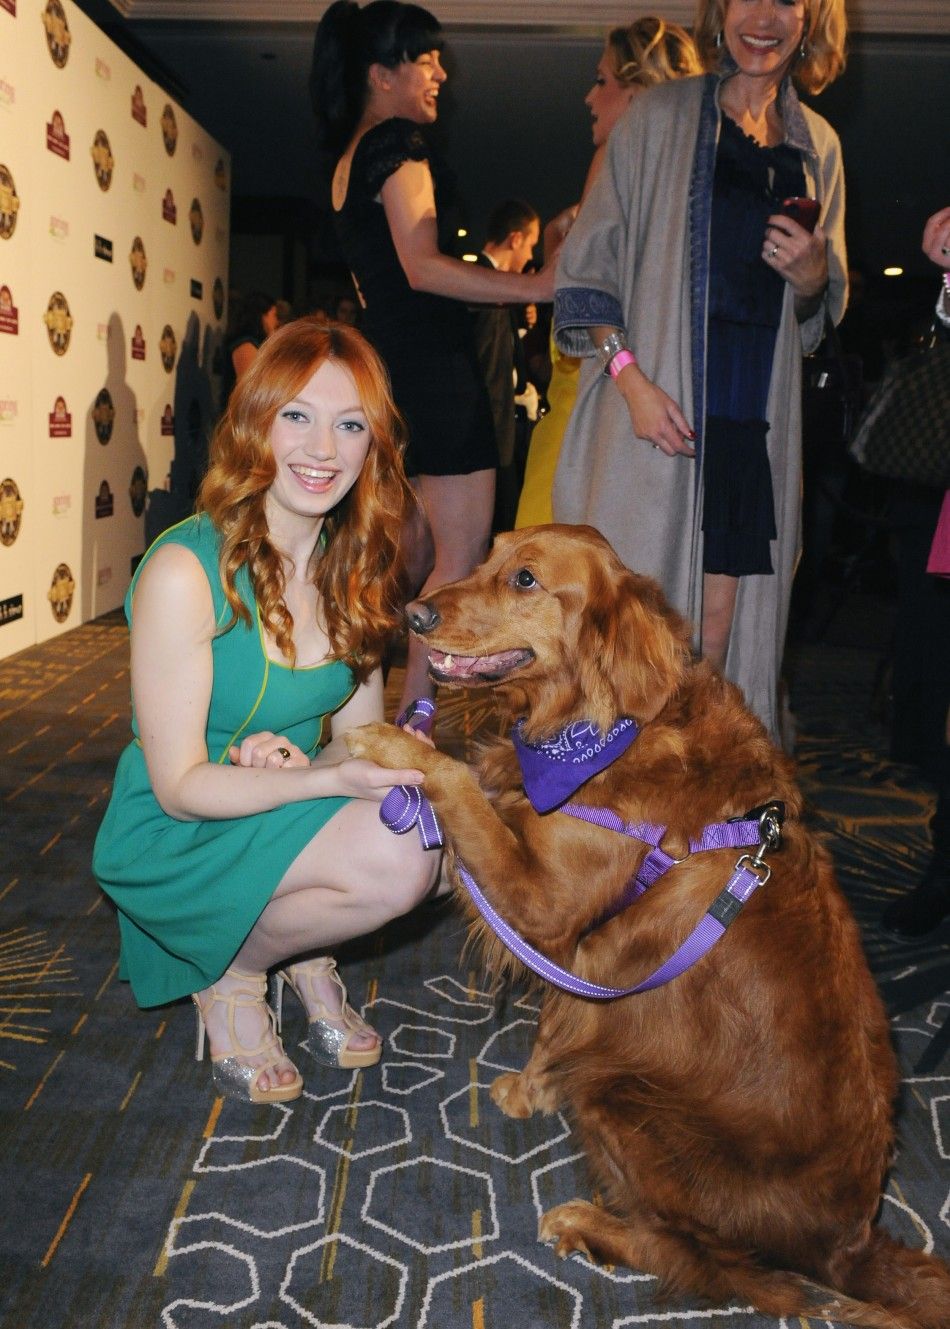 Actress Jacqueline Emerson and her dog Ginger arrive at the first annual Golden Collar Awards celebrating Hollywoods most talented canine thespians from Oscar nominated films and Emmy Award winning television shows in Los Angeles, California 